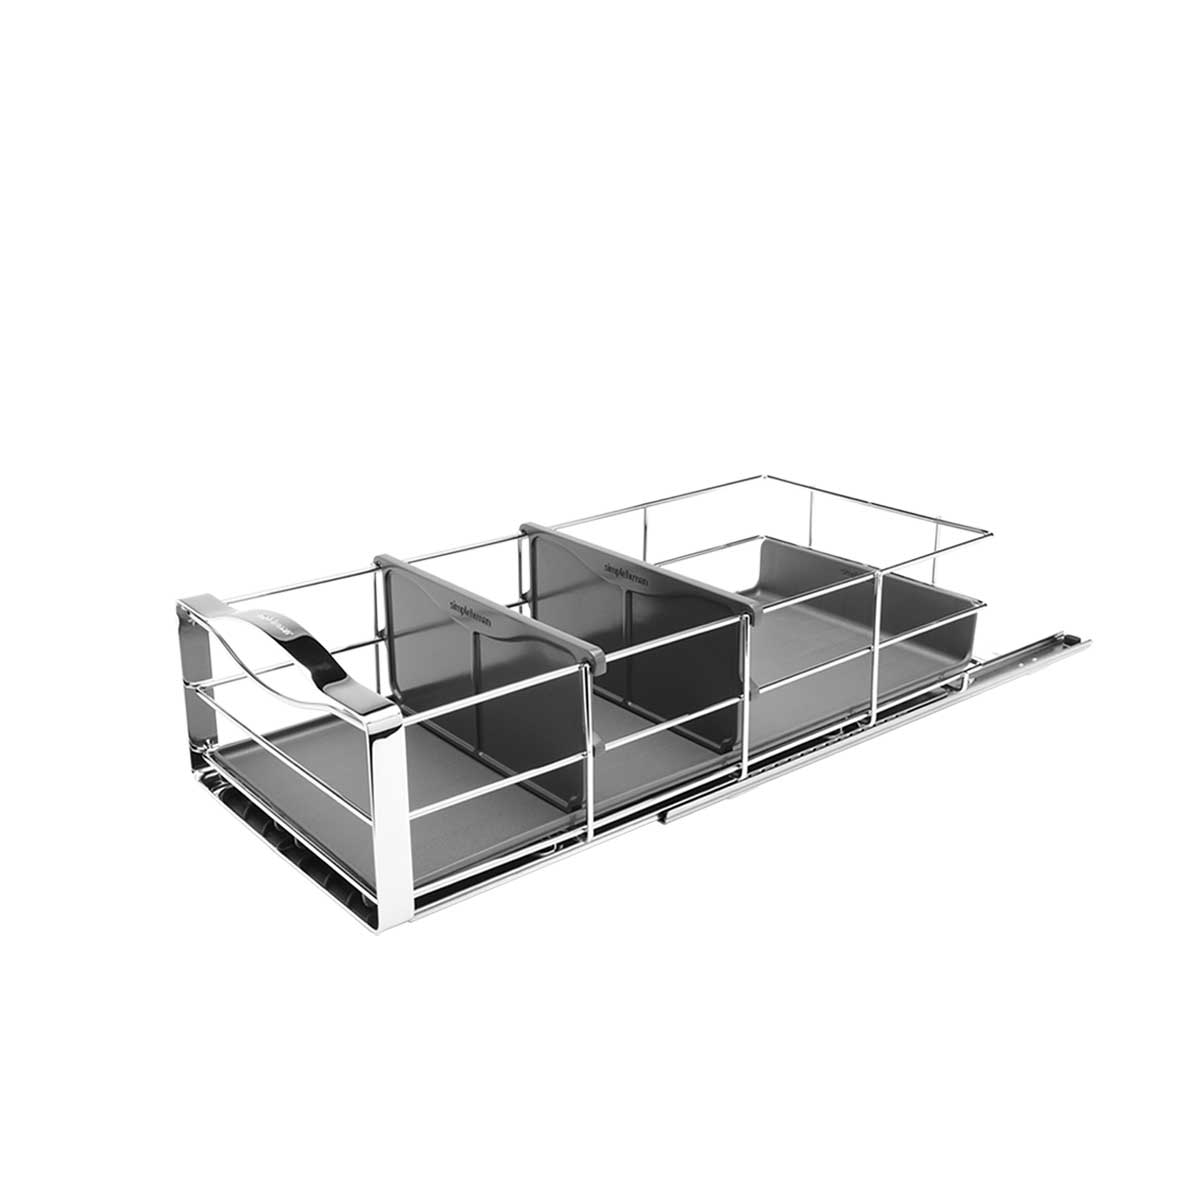 9-inch pull-out cabinet organizer product support